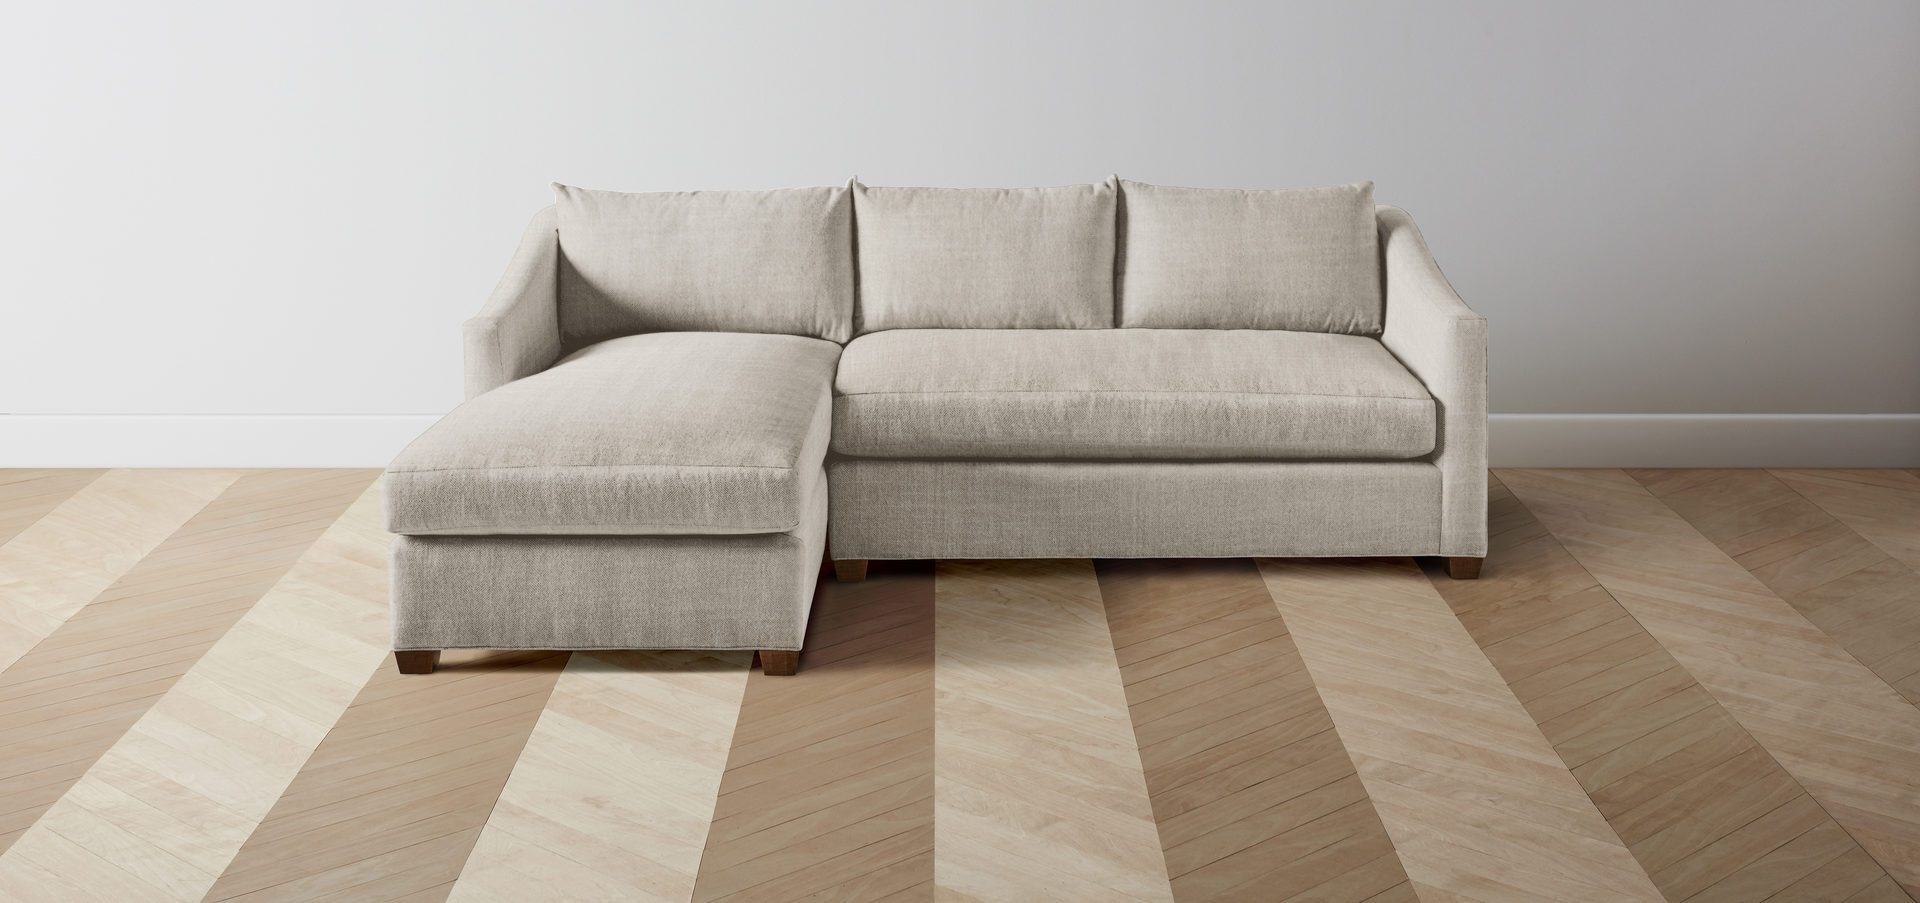 SULLIVAN SECTIONAL - Left hand side chaise - Image 0